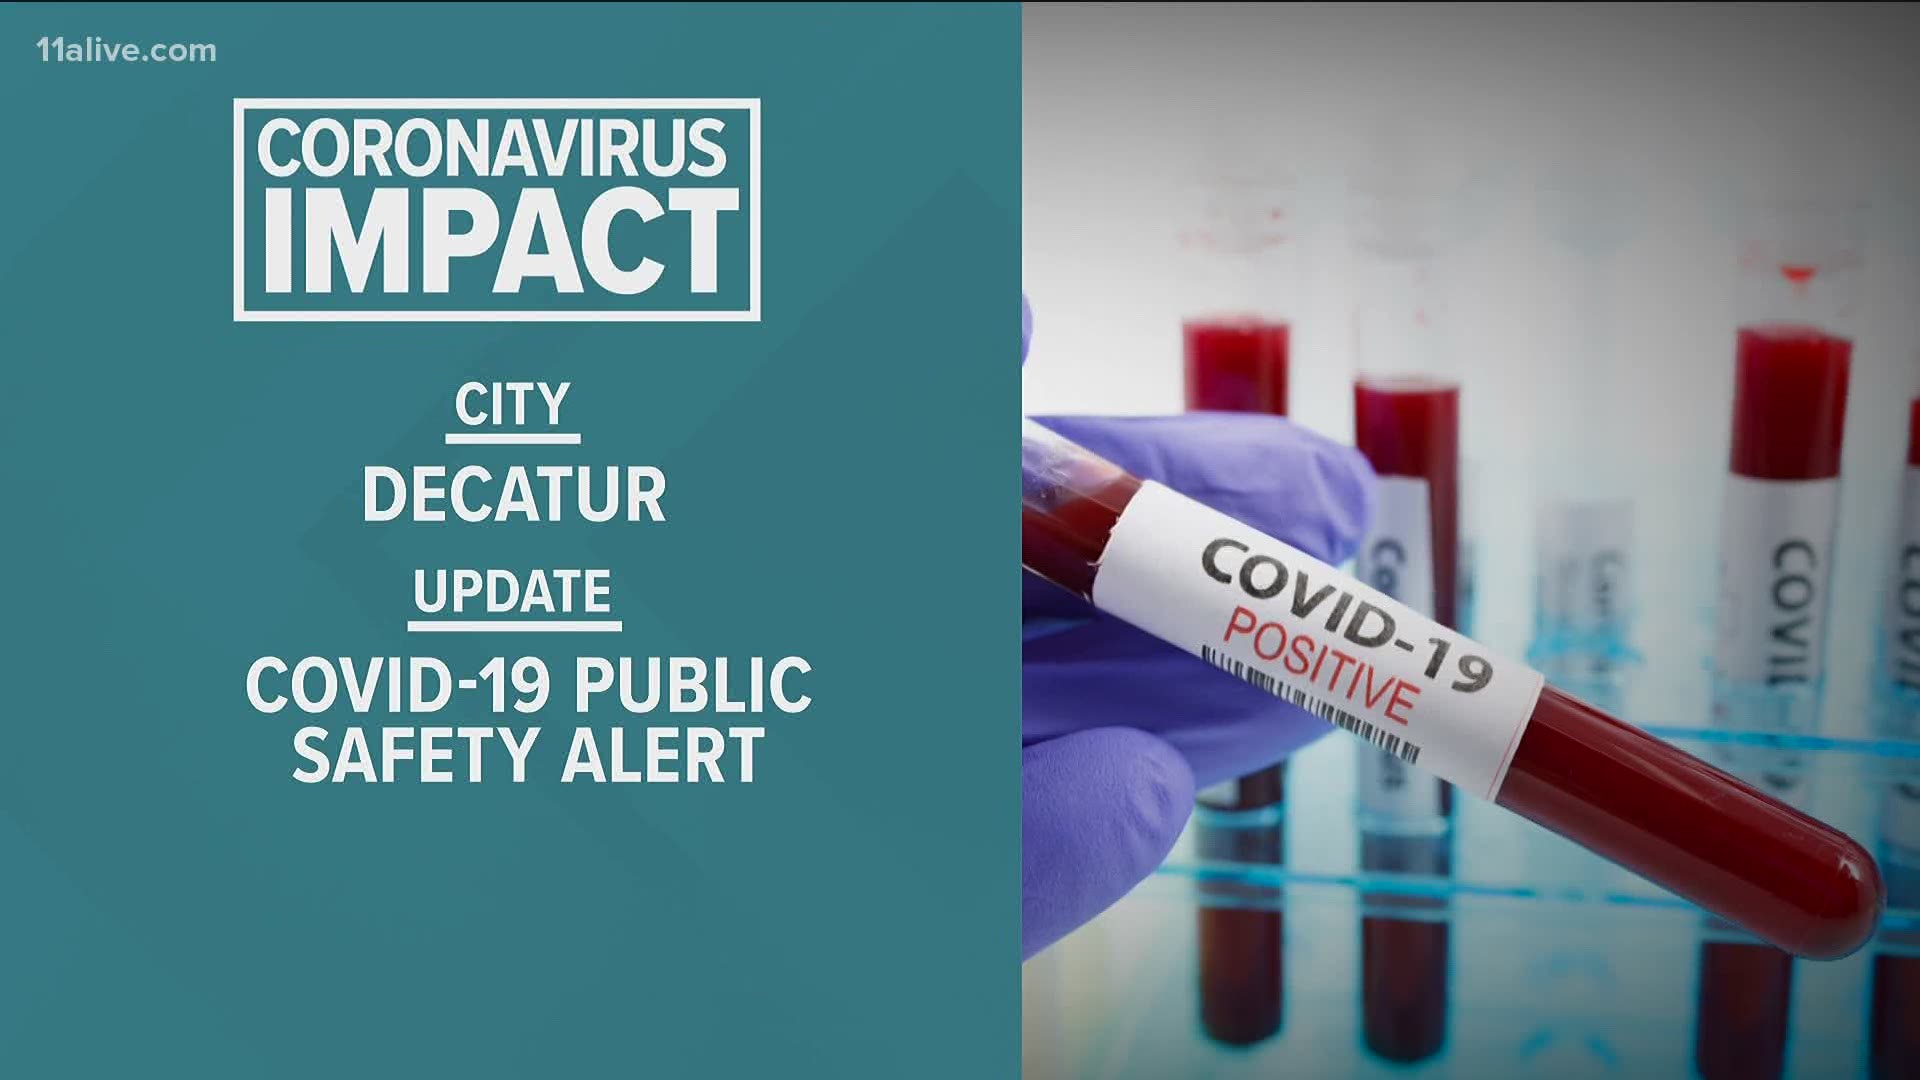 Here are some top headlines for the day about the coronavirus.